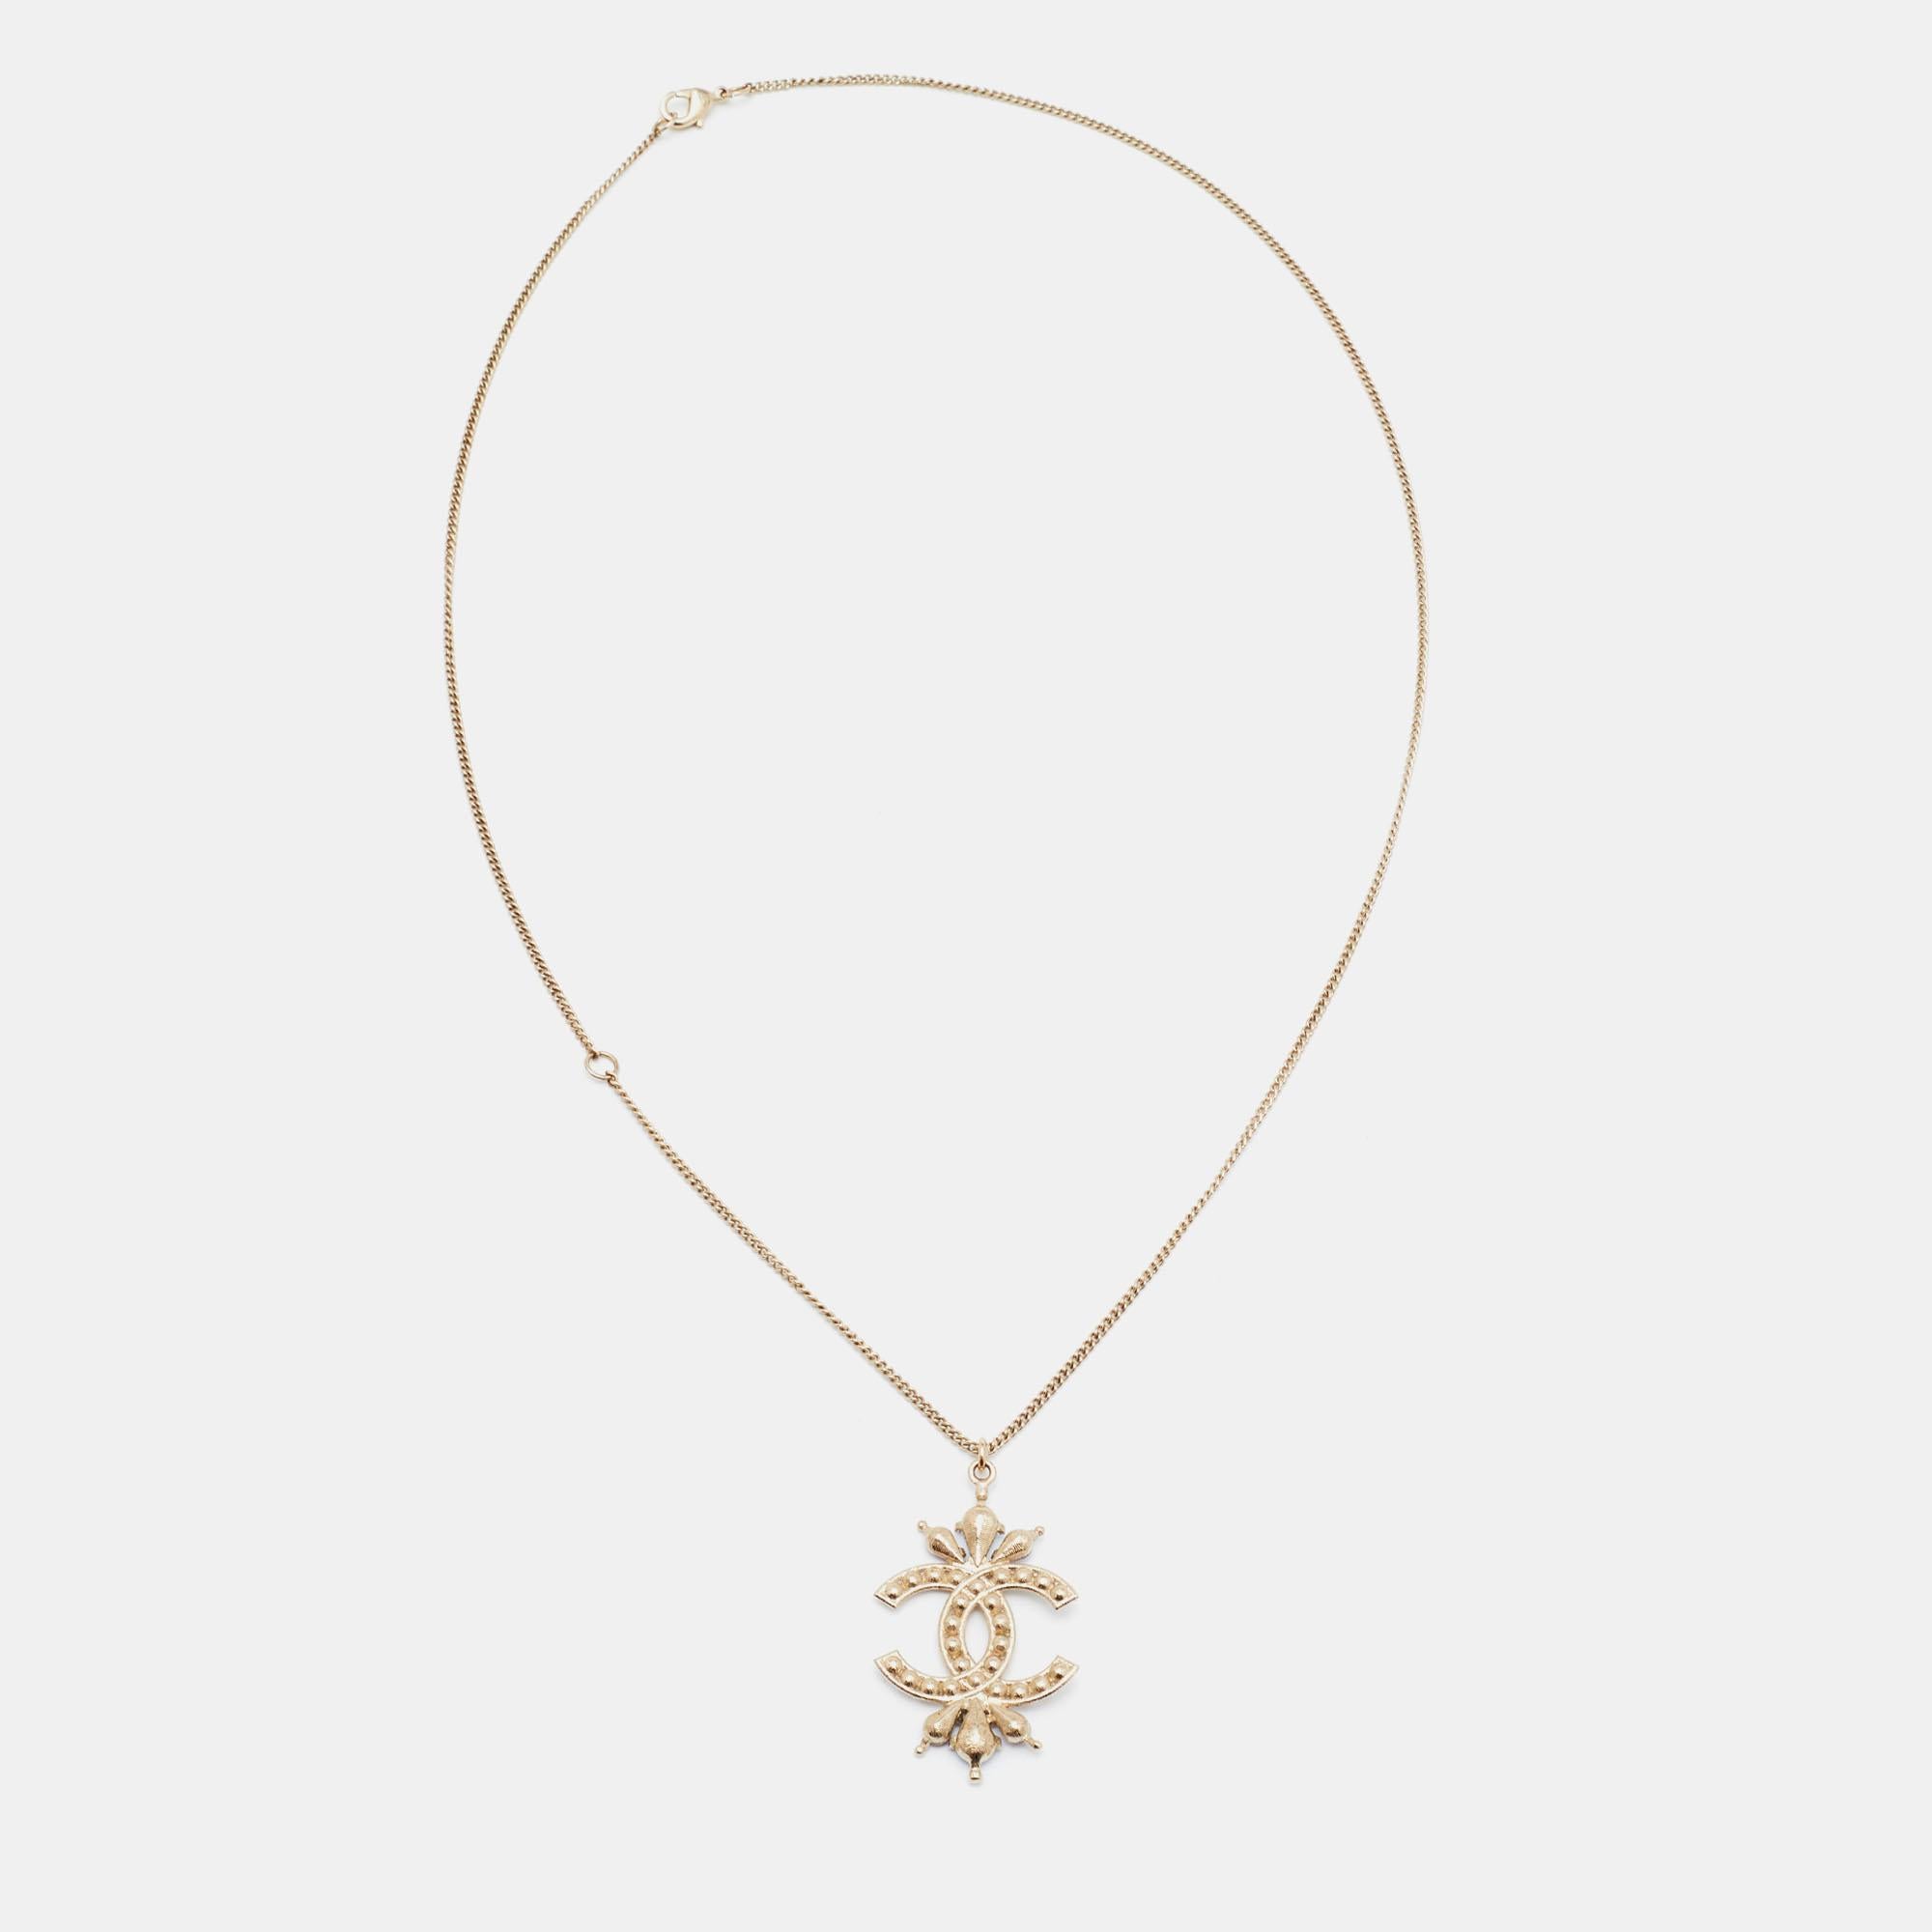 Wear this Chanel pendant necklace as a little special accent to your everyday style. It has a gold-tone metal chain with a lobster clasp and a CC logo pendant.

Includes: Original Box, Original Case

